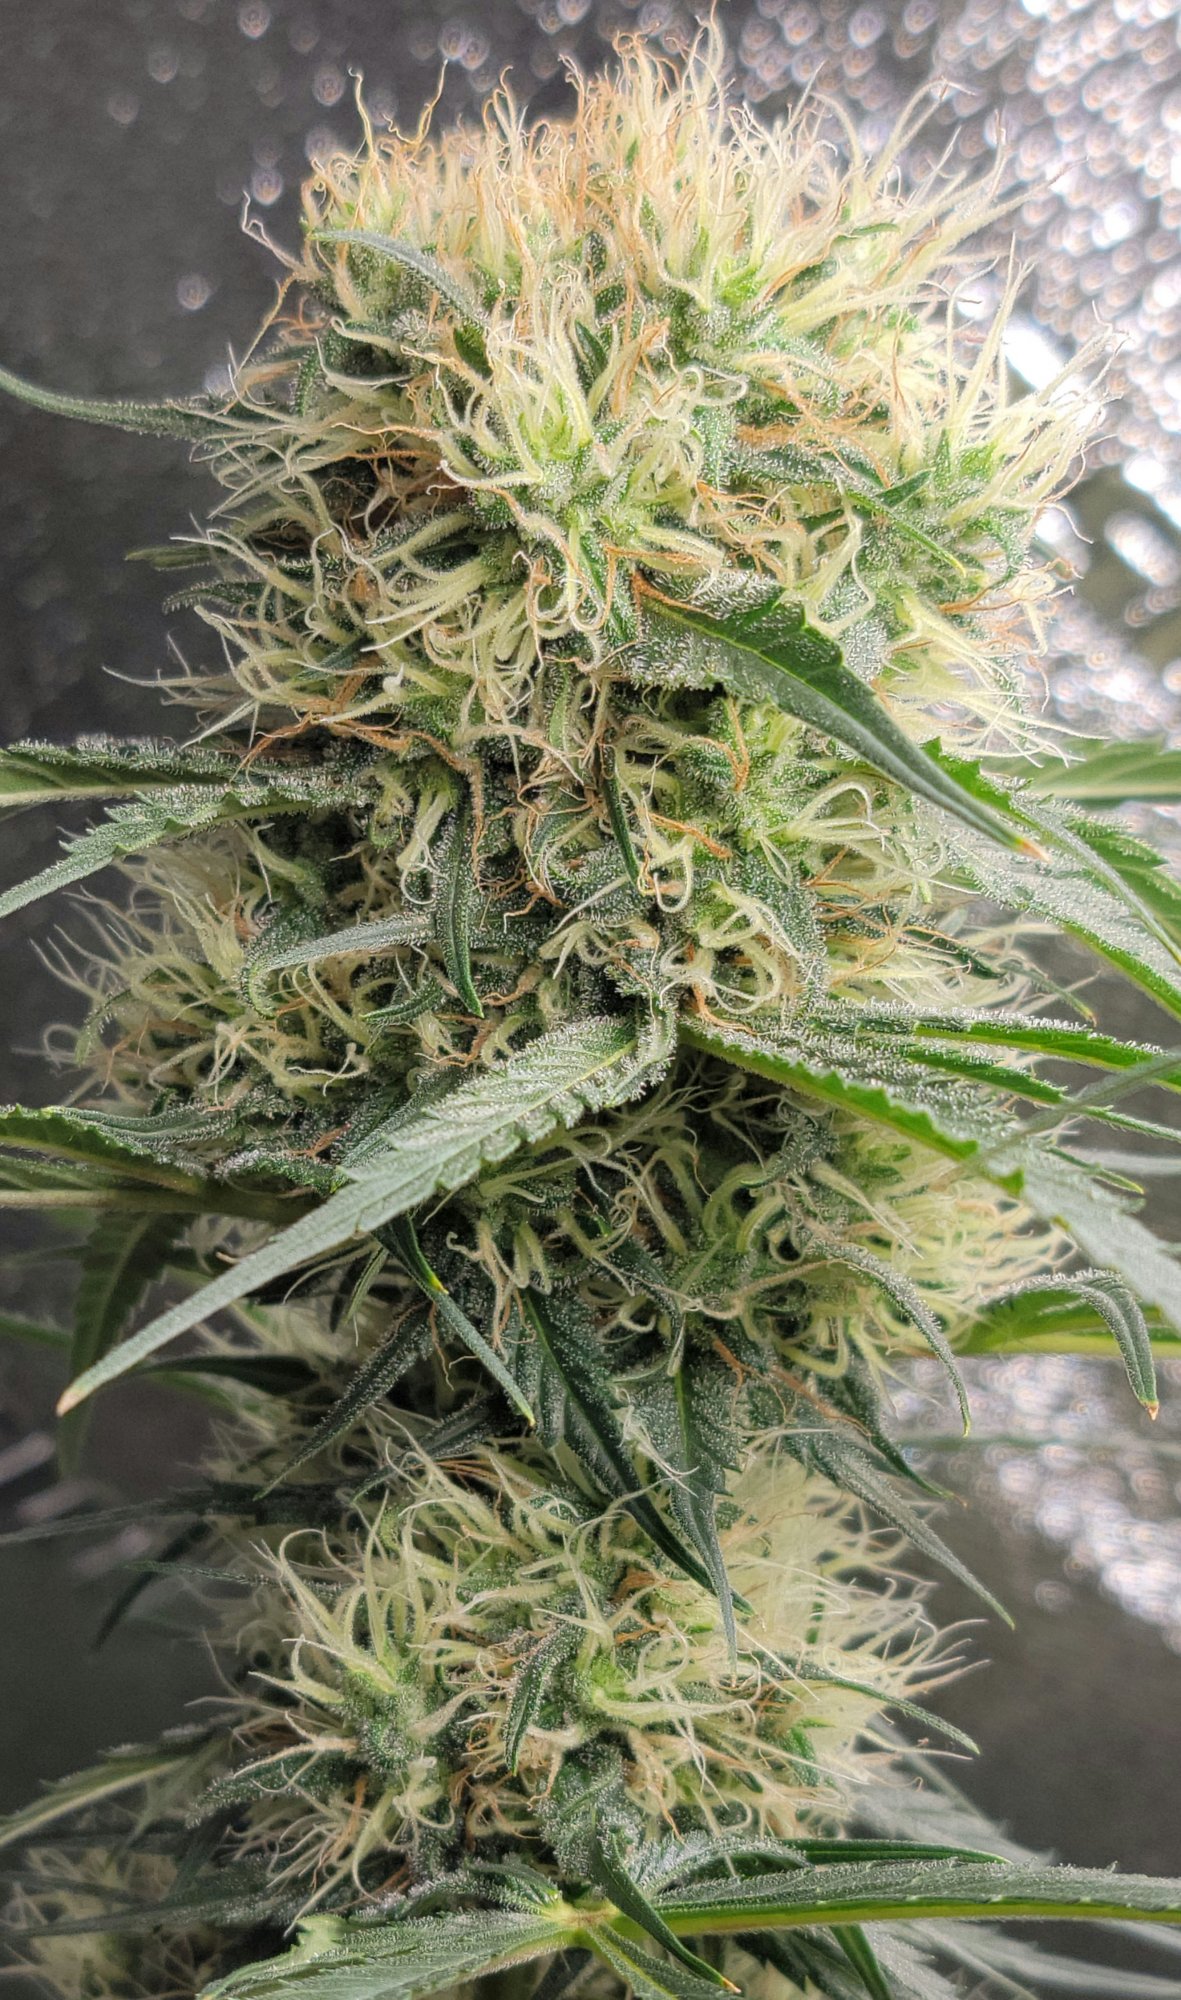 How close do you guys think this plant is to harvest